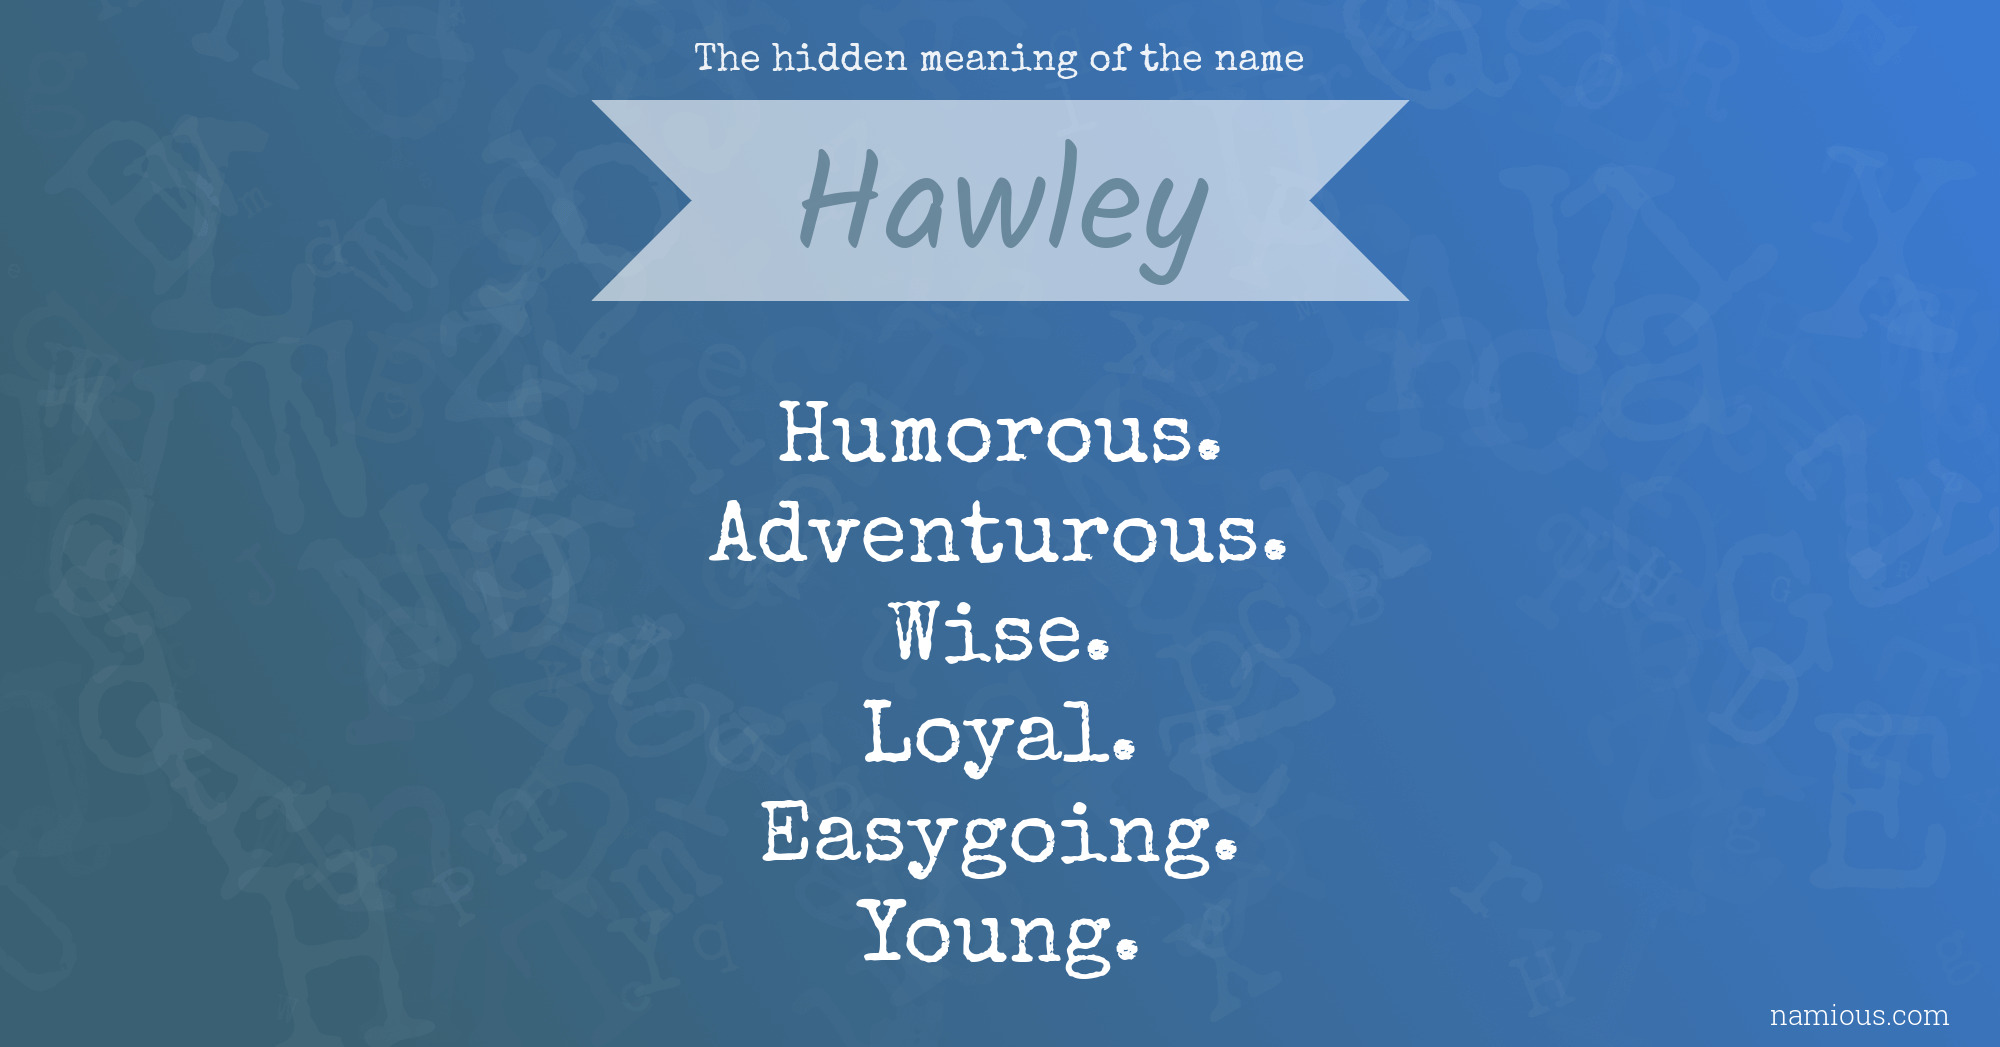 The hidden meaning of the name Hawley